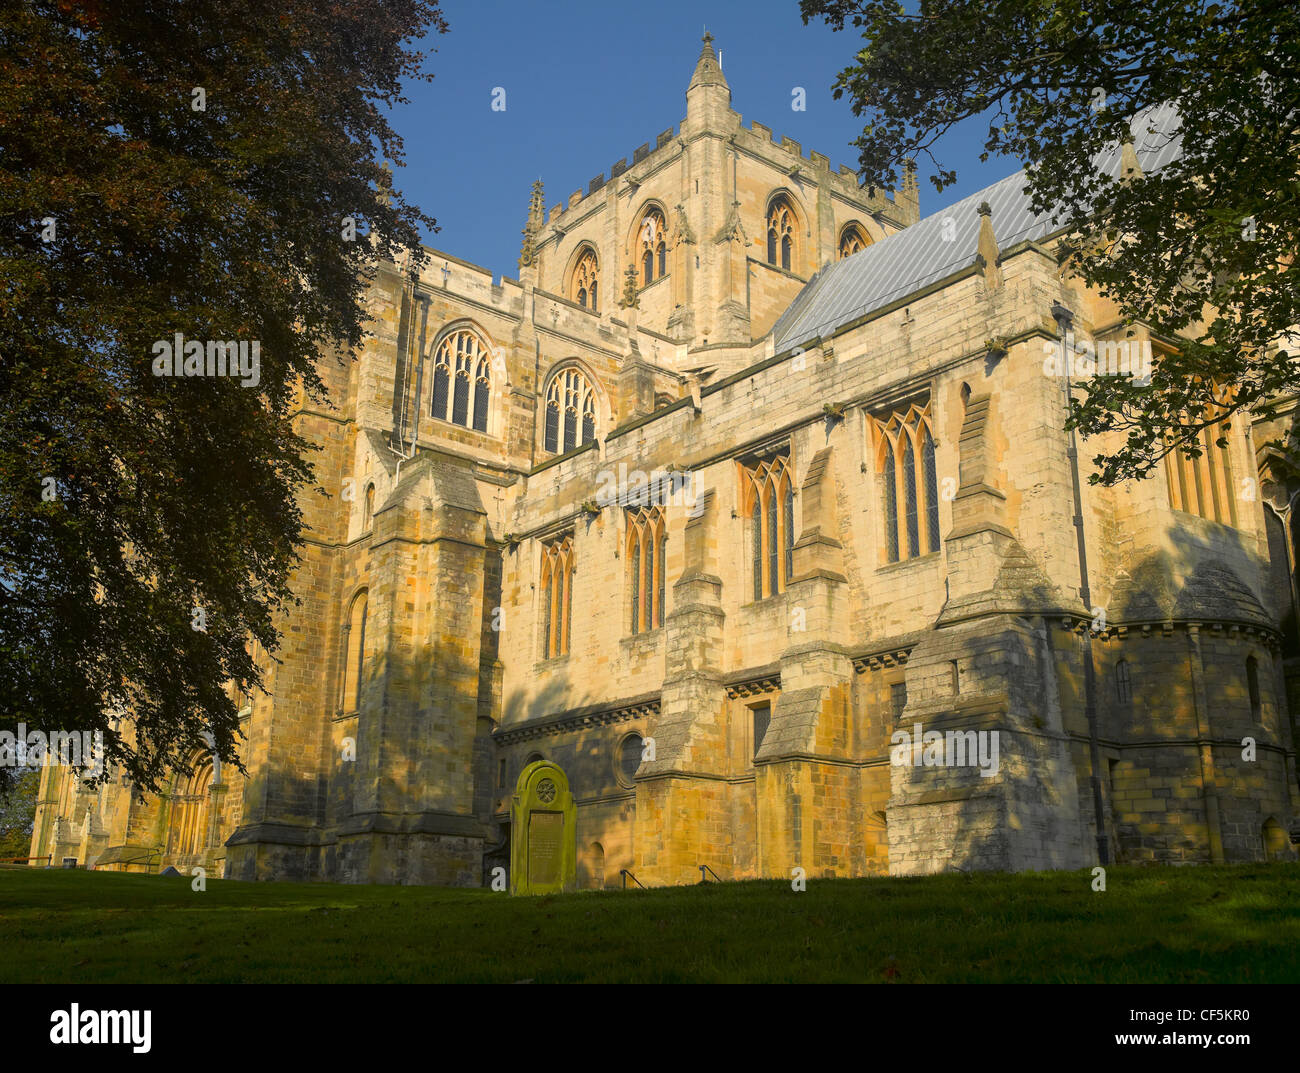 Ripon Cathedral standing on one of the oldest sites of continuous Christian worship in Great Britain. Stock Photo